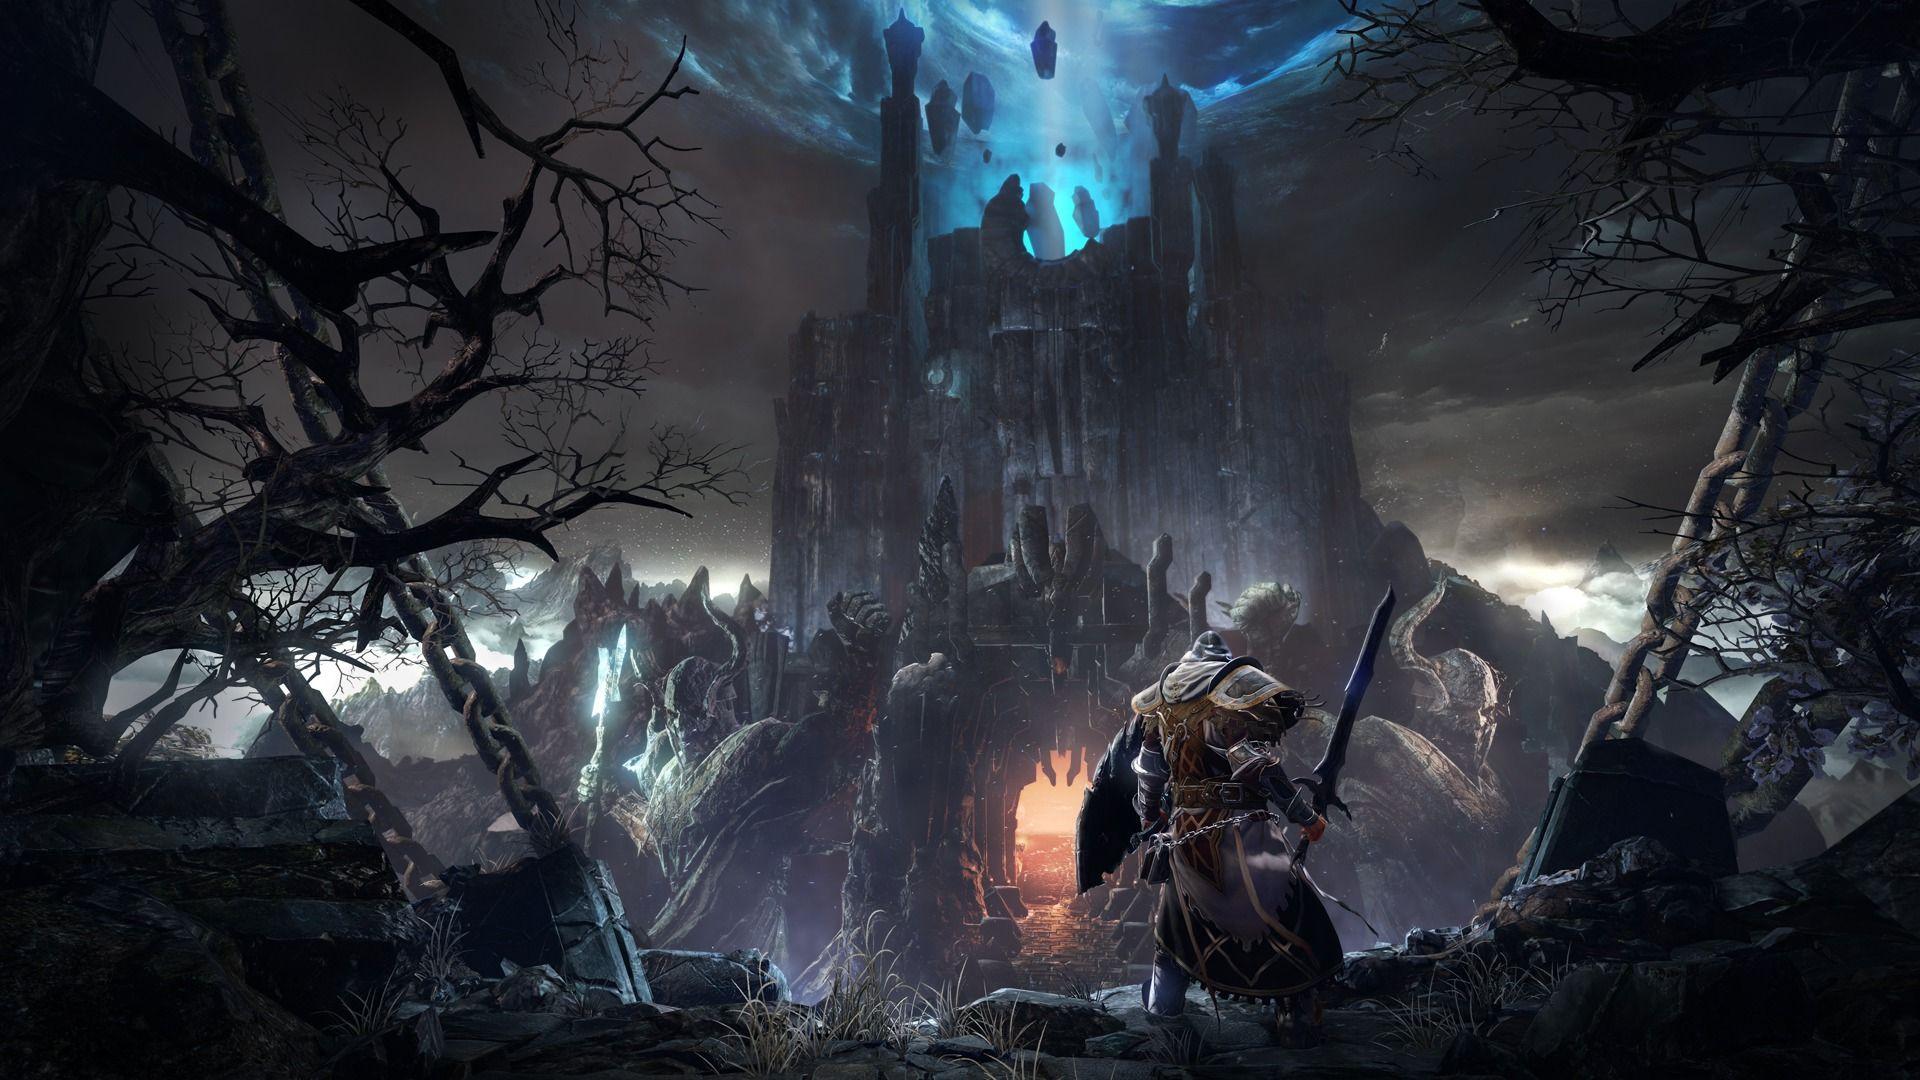 Lords of the Fallen for apple download